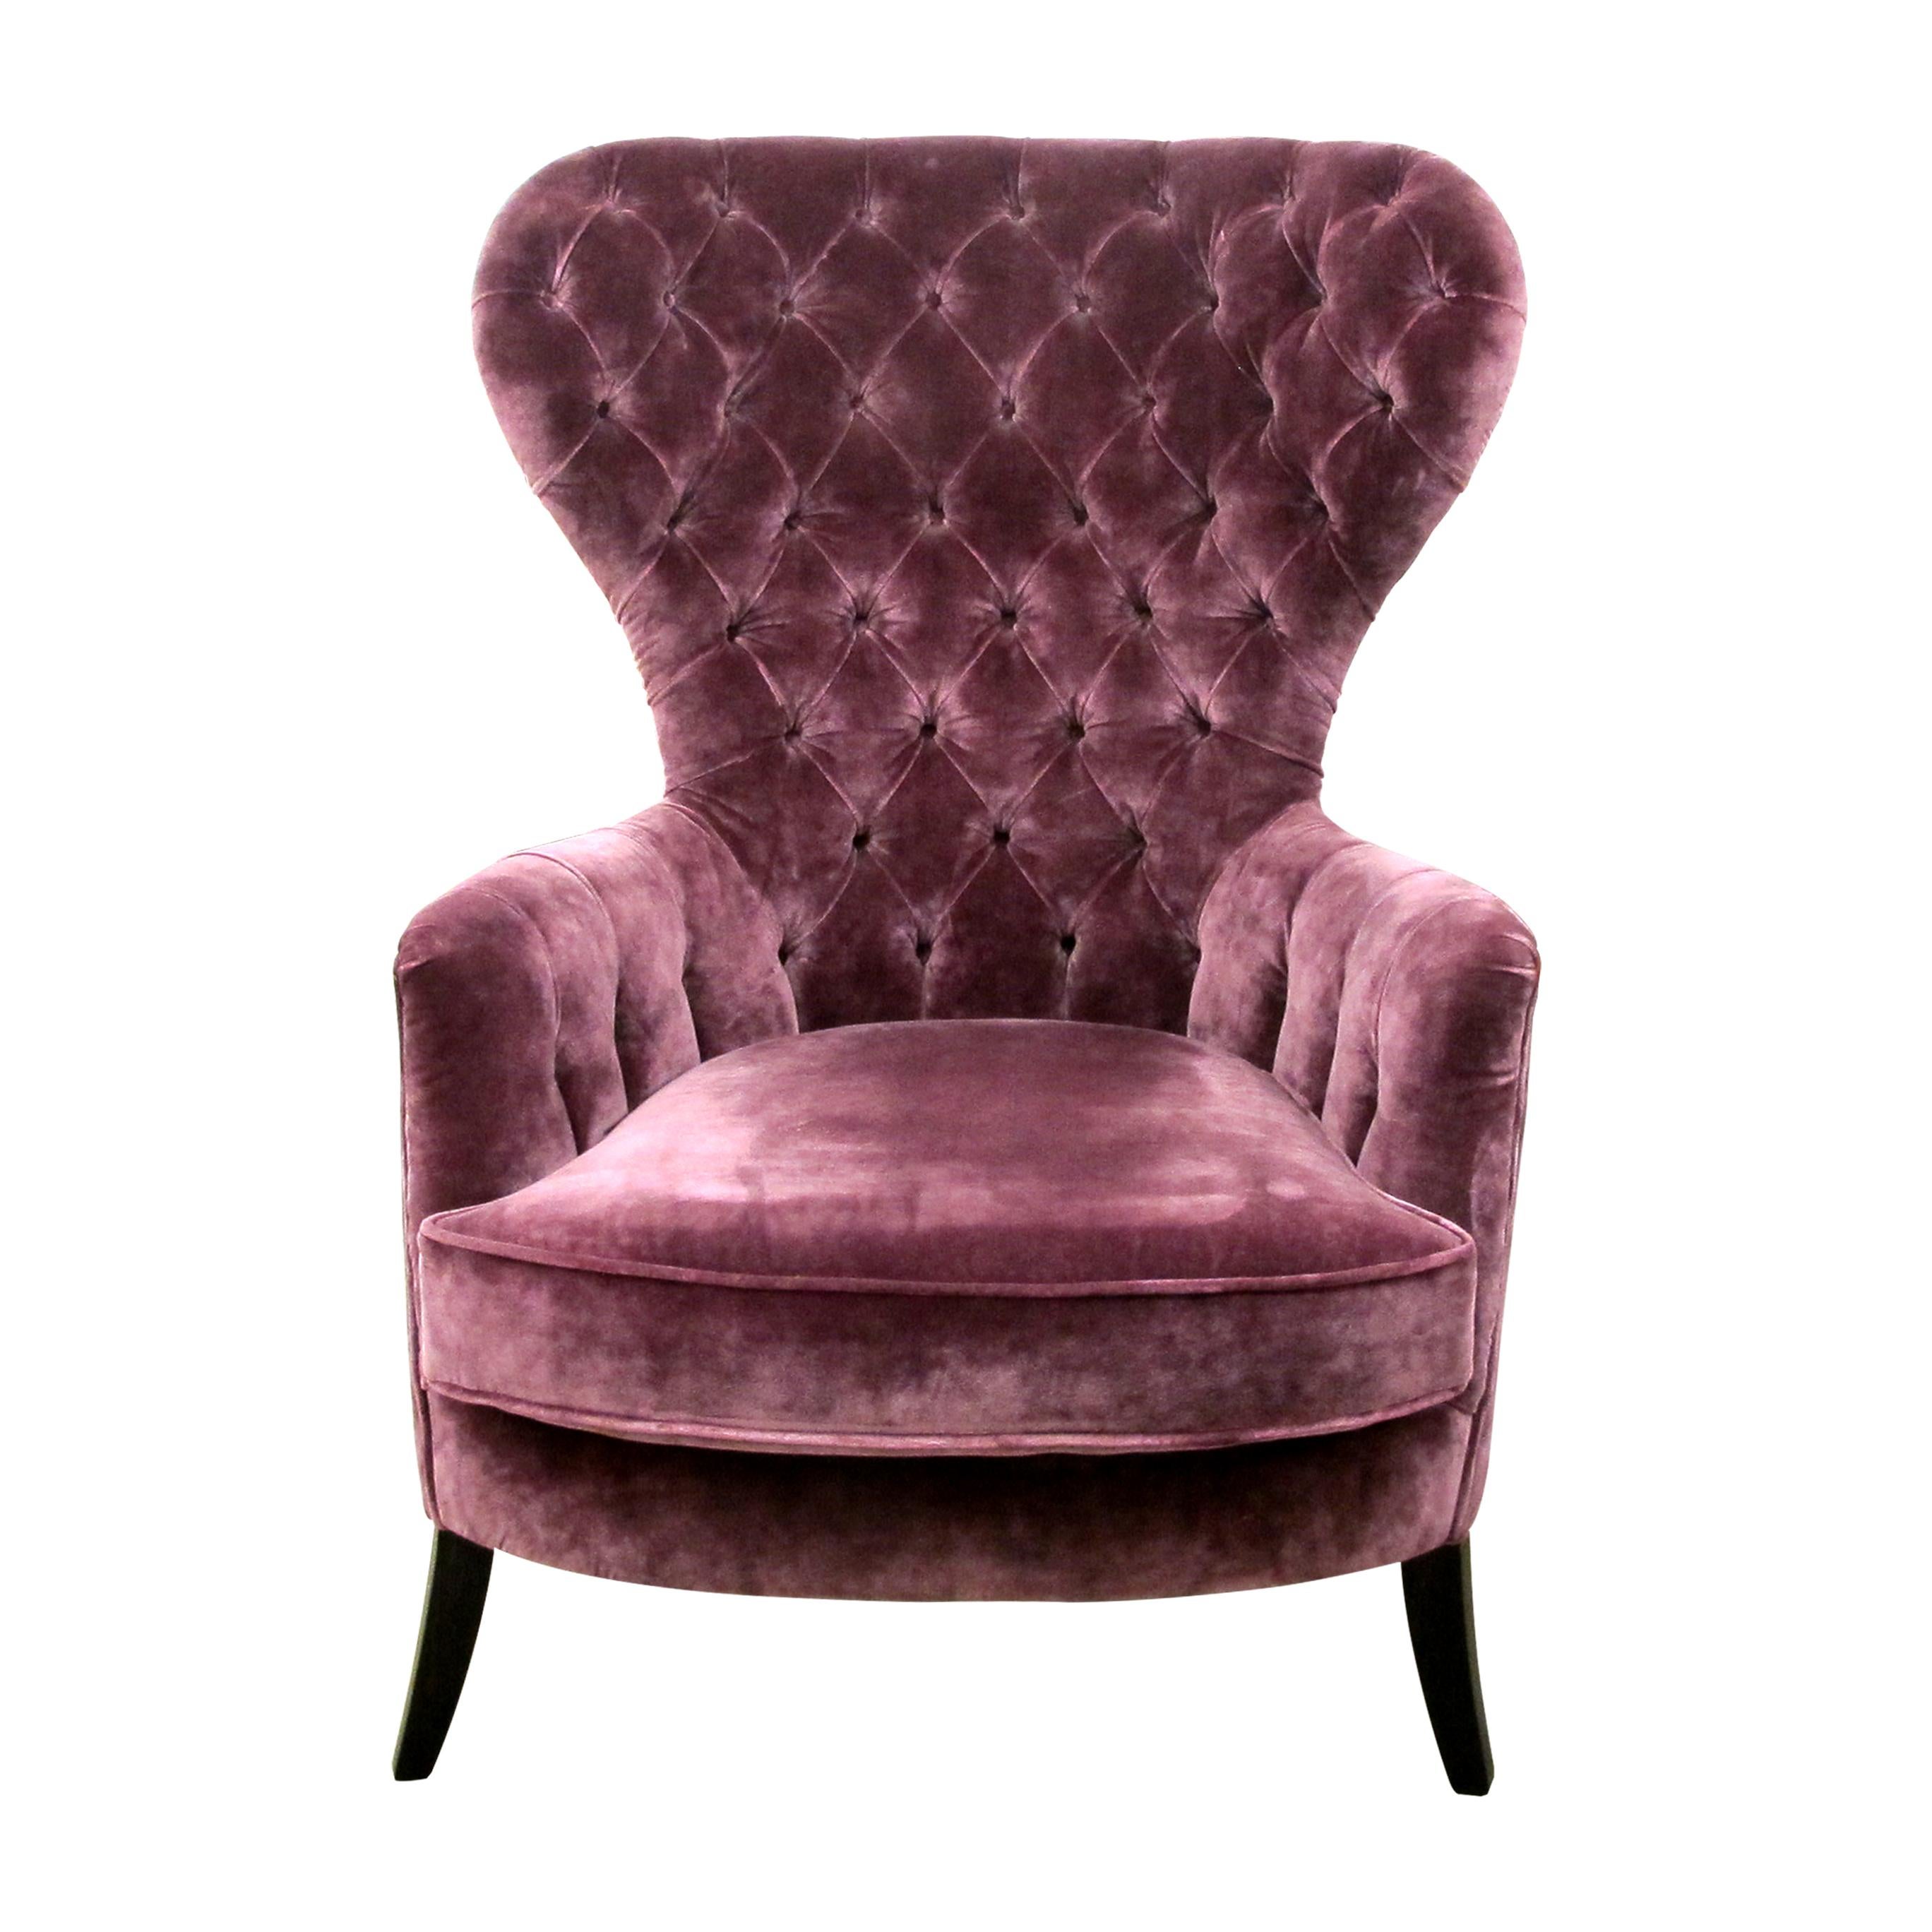 Elegant 1980s custom-made wingback chair often referred to as a “Wing Chair” with generous curves and padding, upholstered in a deep purple velvet fabric. The chair is very comfortable with great back support and is in great condition.

Size: H115